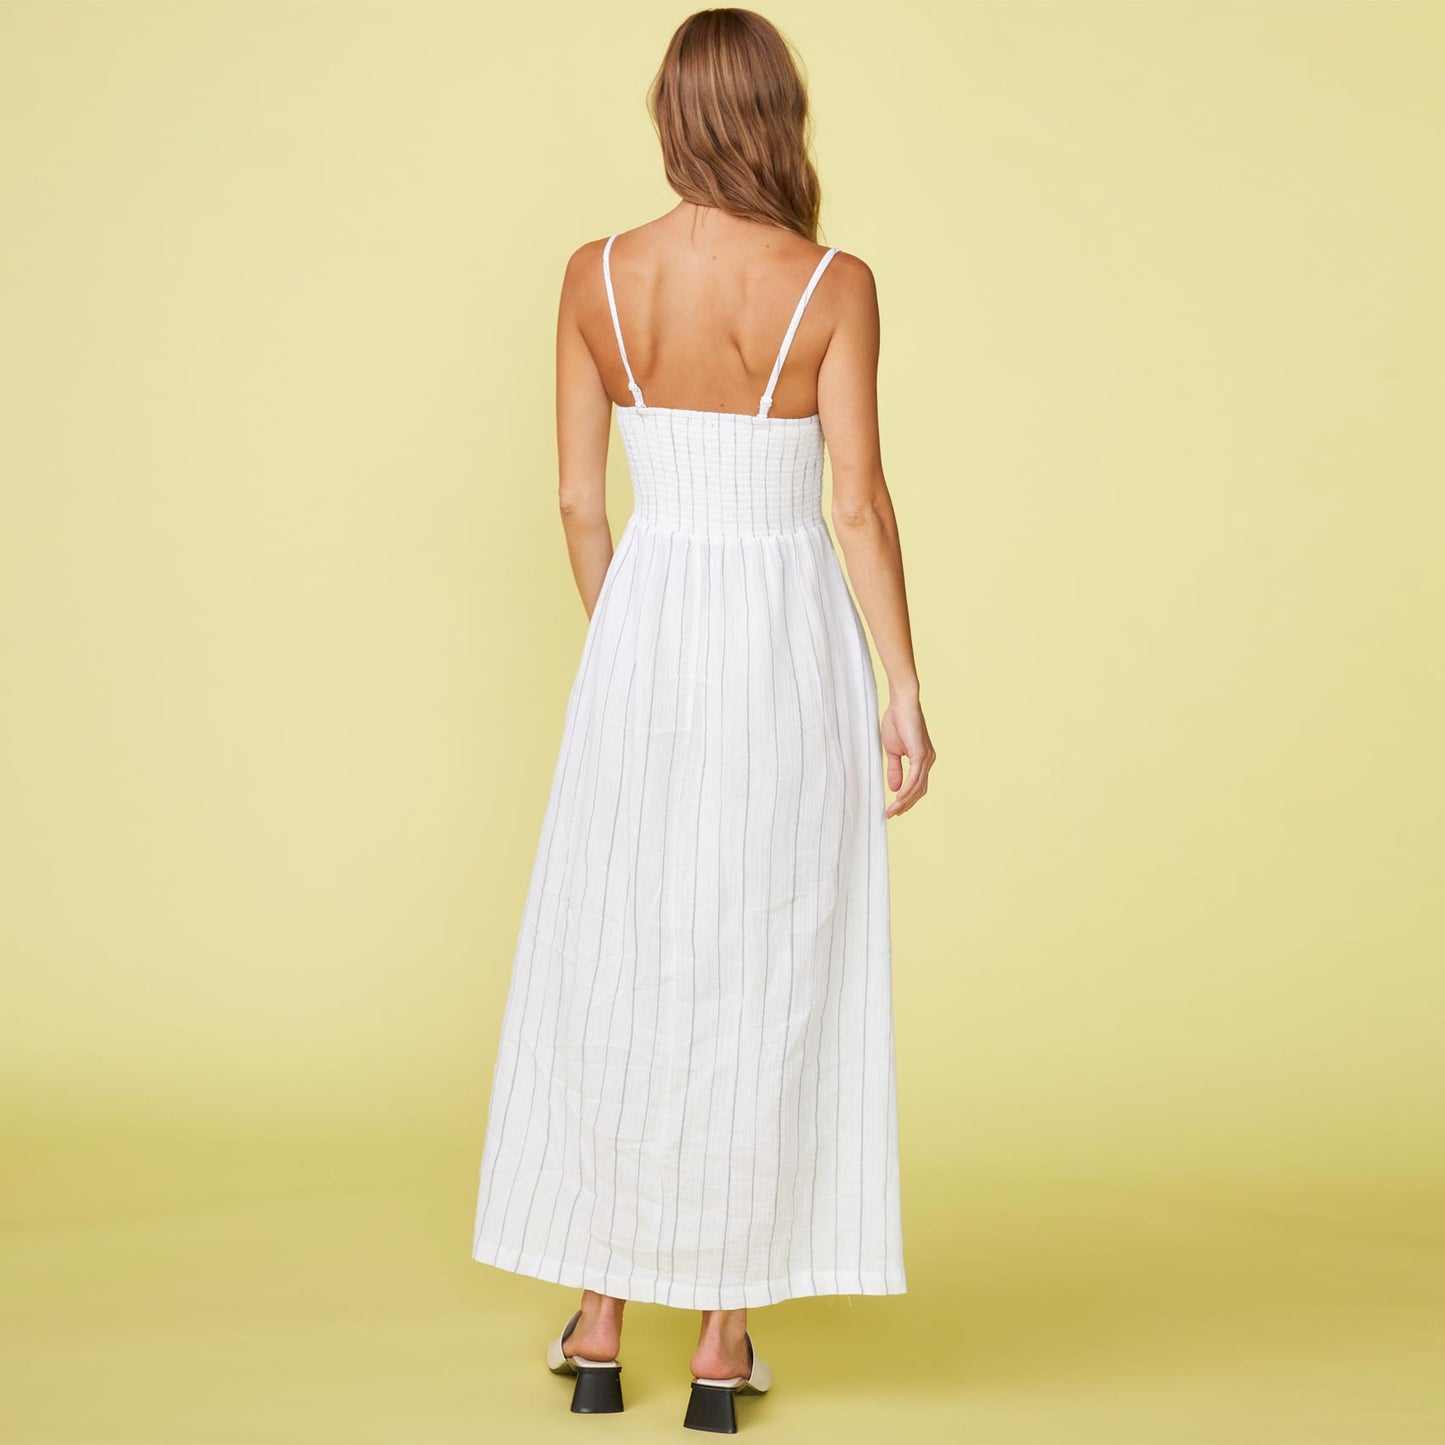 Back view of model wearing the pinstripe gauze smocked maxi dress in white.